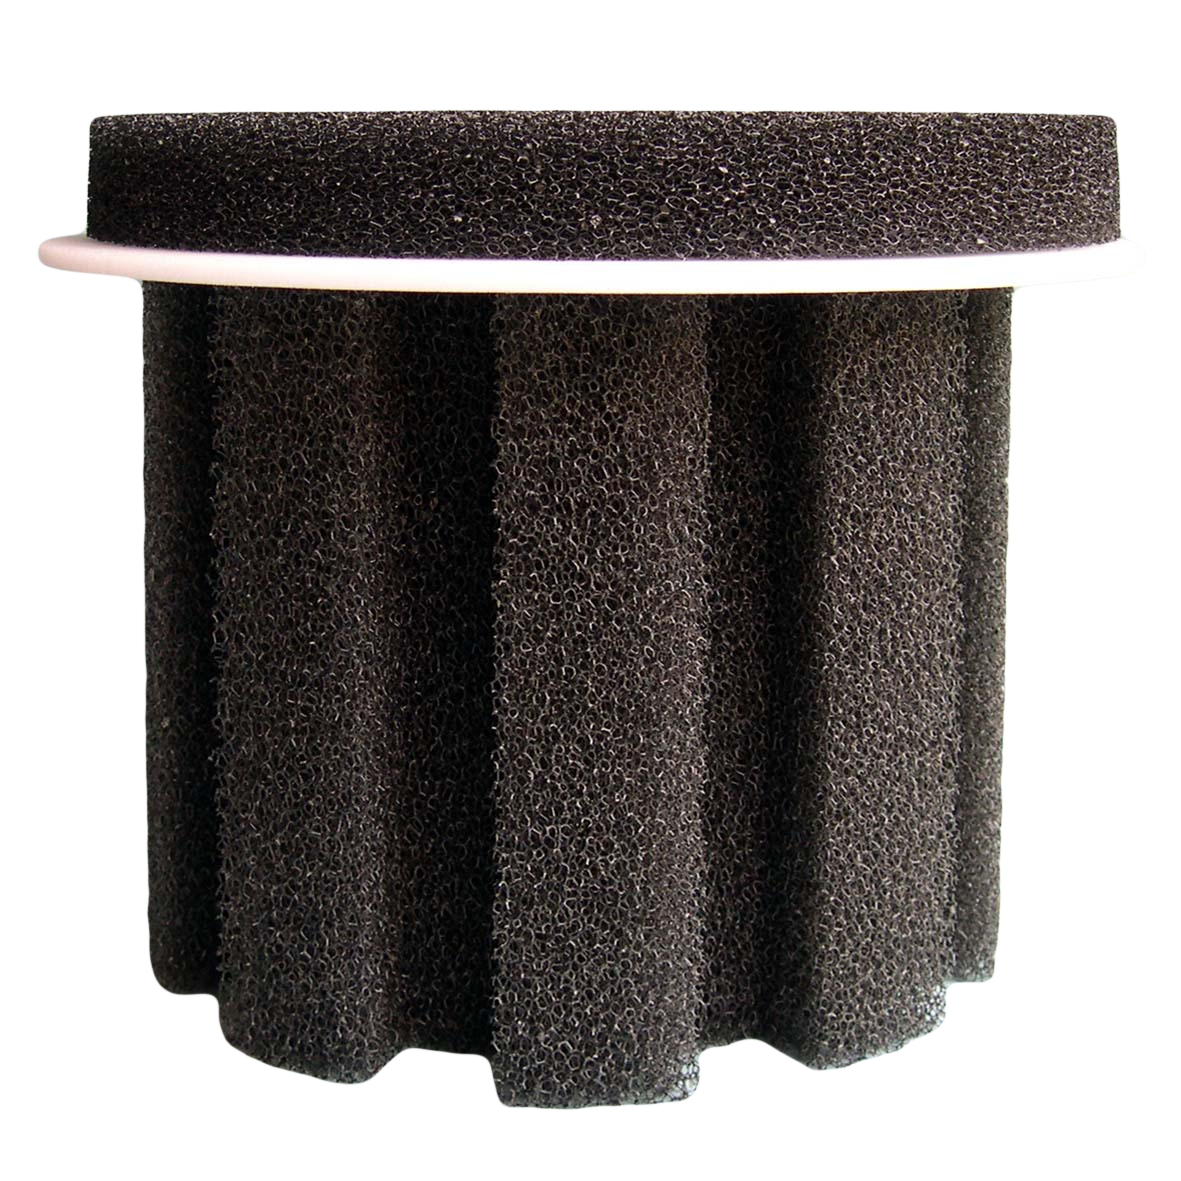 Image of Replacement Filter Foam and Piston: Fish Mate 10000/15000 PUV and Fish Mate 15000 PBIO Pond Filter (273)